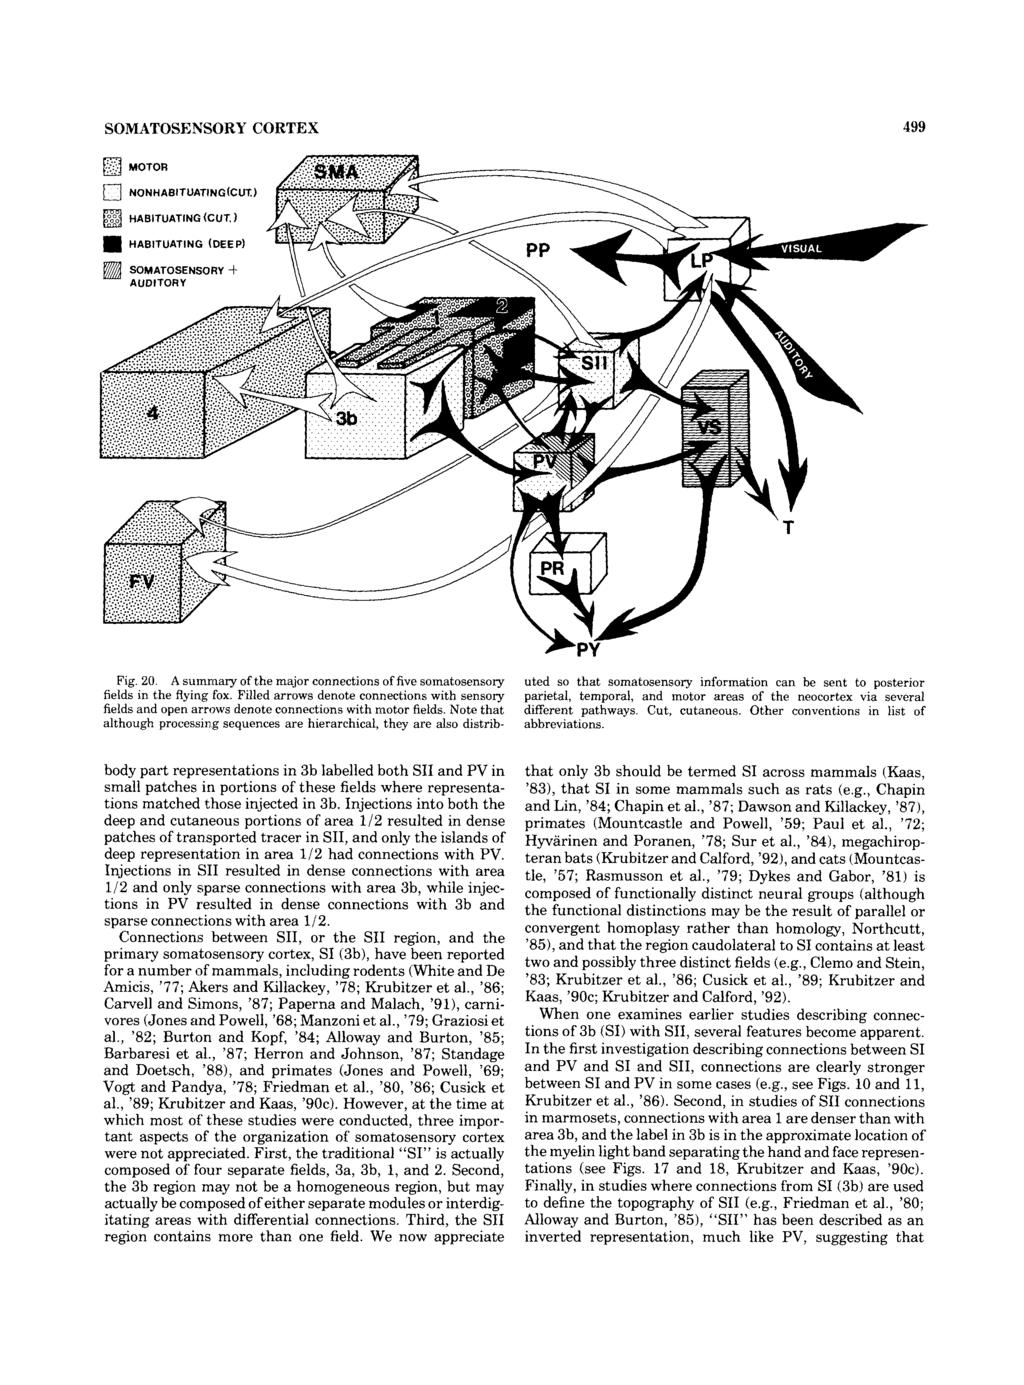 SOMATOSENSORY CORTEX 499 0 NONHABITUATING(CUT) HABITUATING (CUT. HABITUATING (DEEP) SOMATOSENSORY 4- Fig. 20. A summary of the major connections of five somatosensory fields in the flying fox.